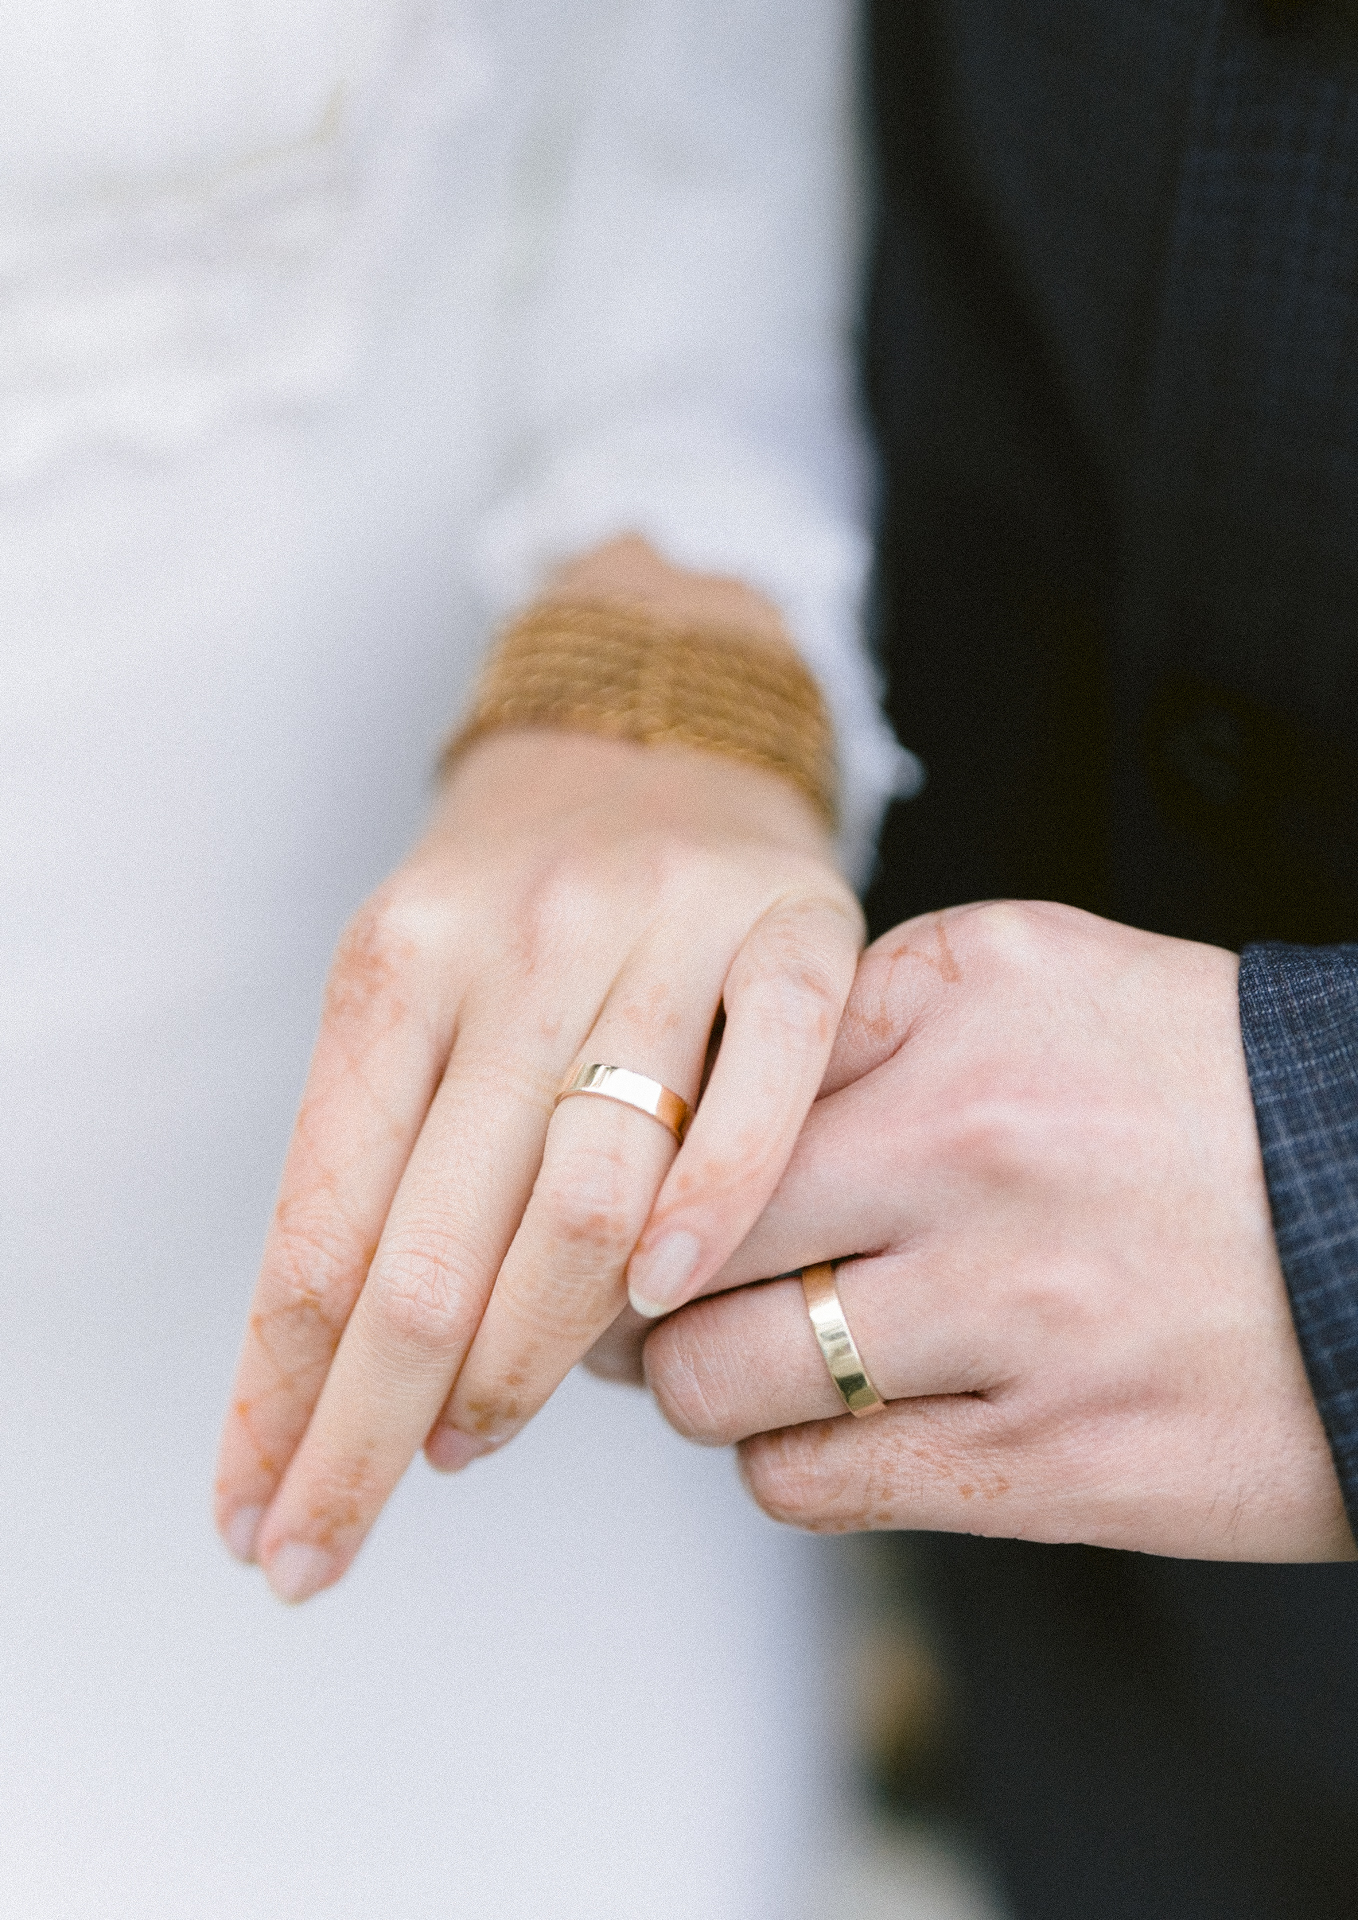 A close-up of a couple's hands showcasing their wedding rings.